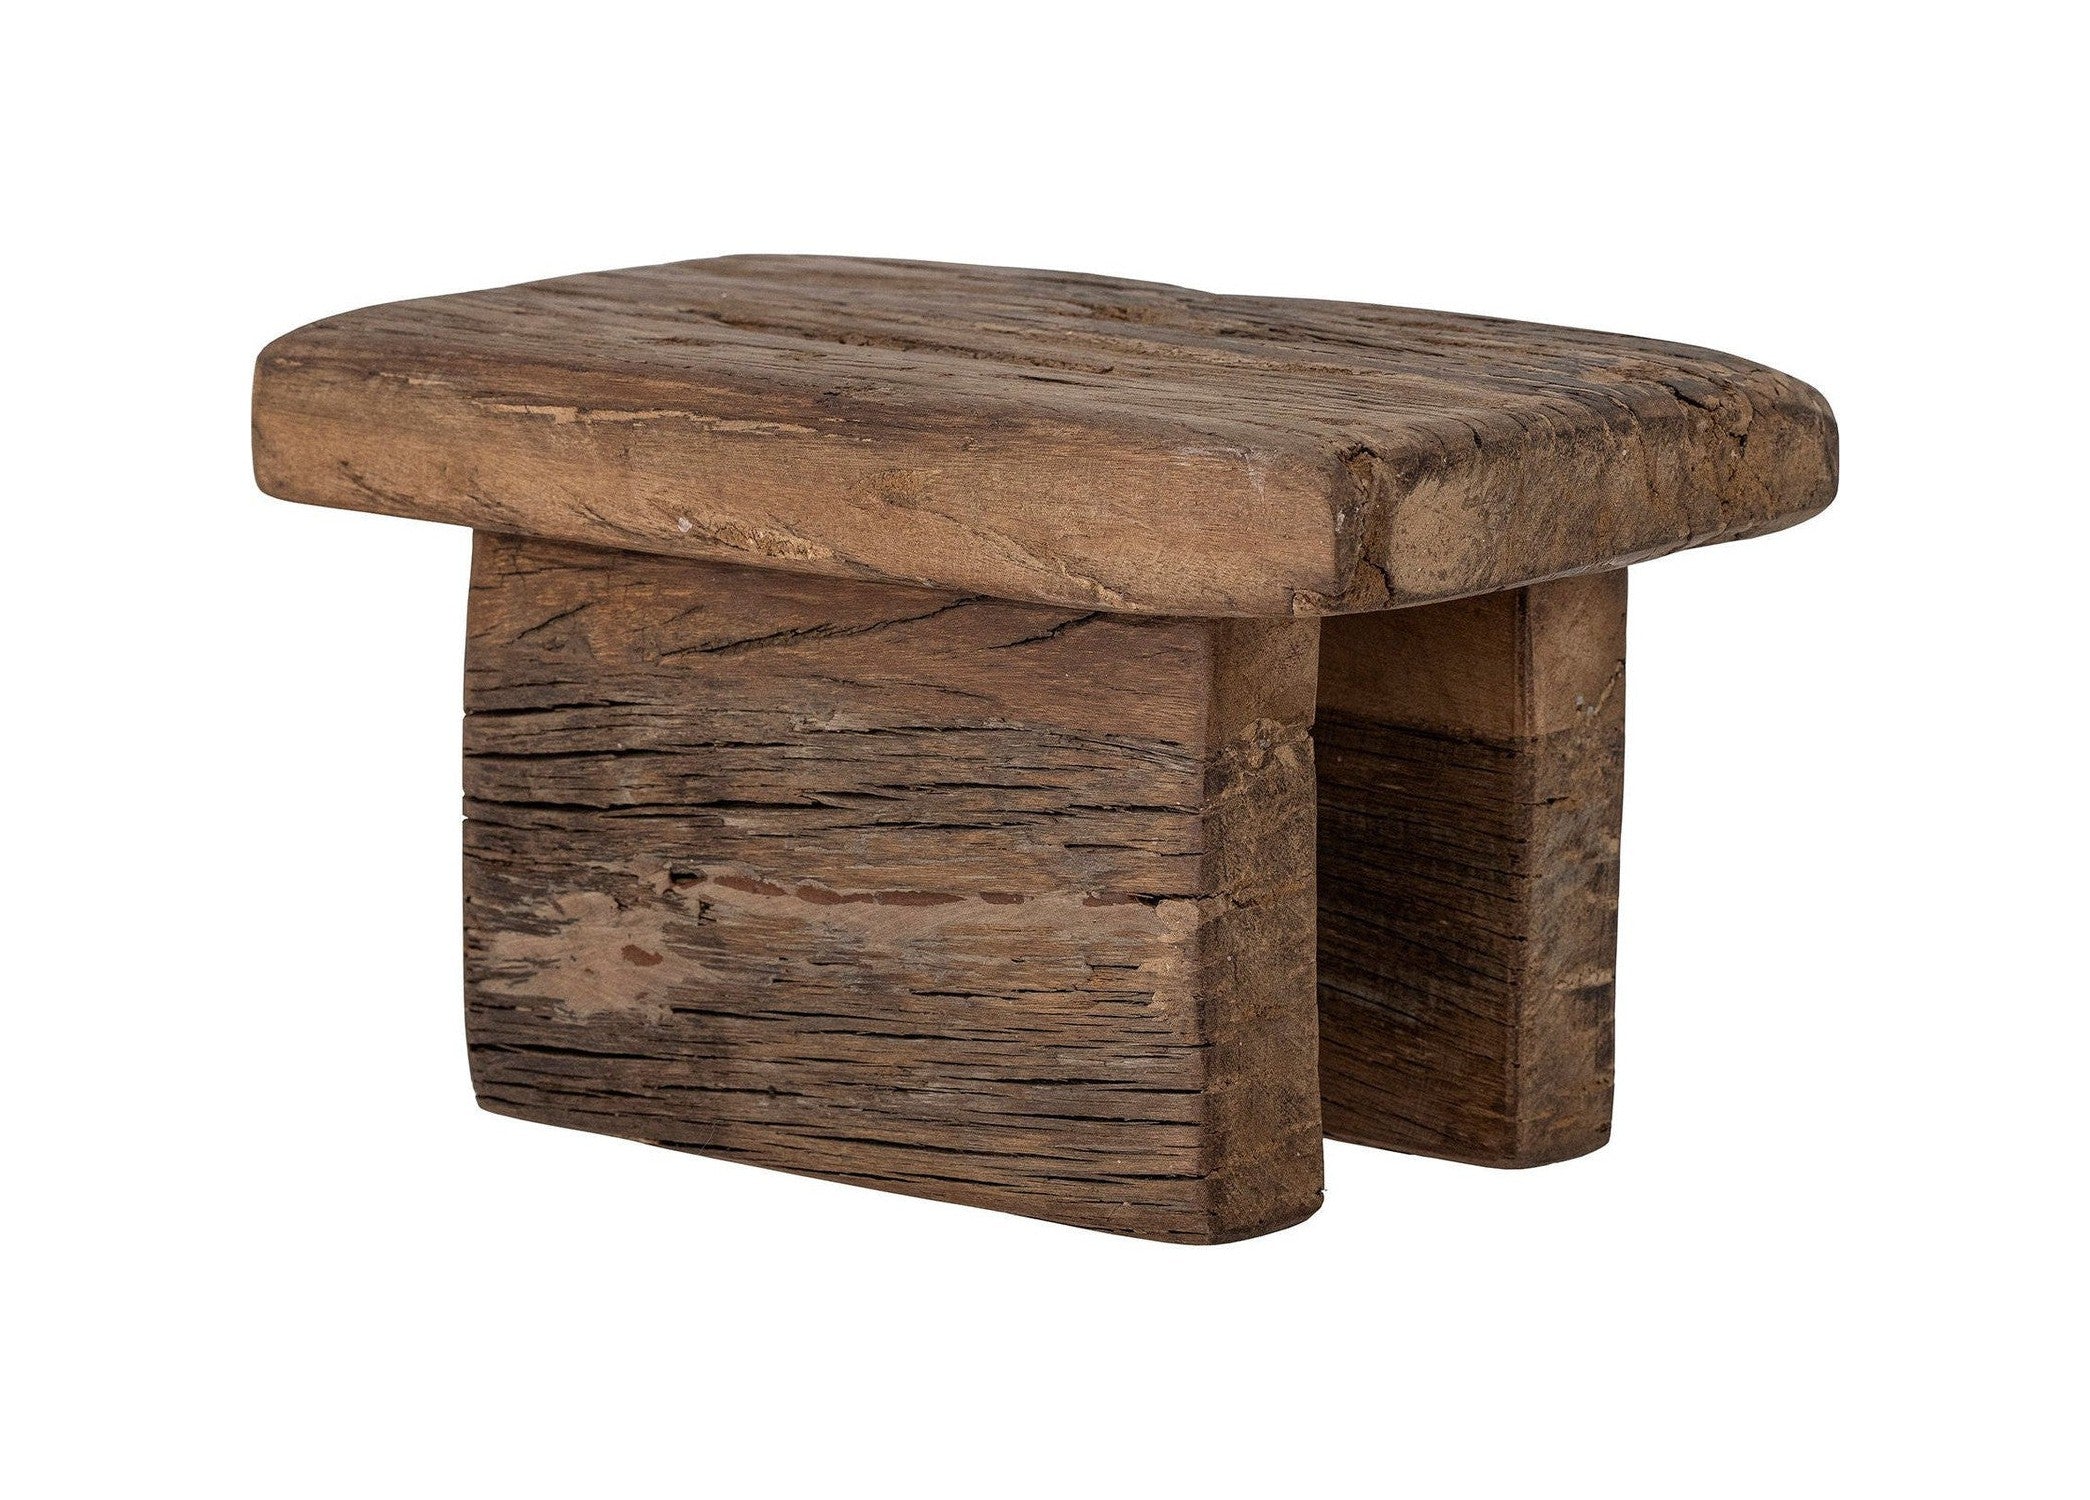 Creative Collection Tamy Pedestal, Brown, Reclaimed Wood